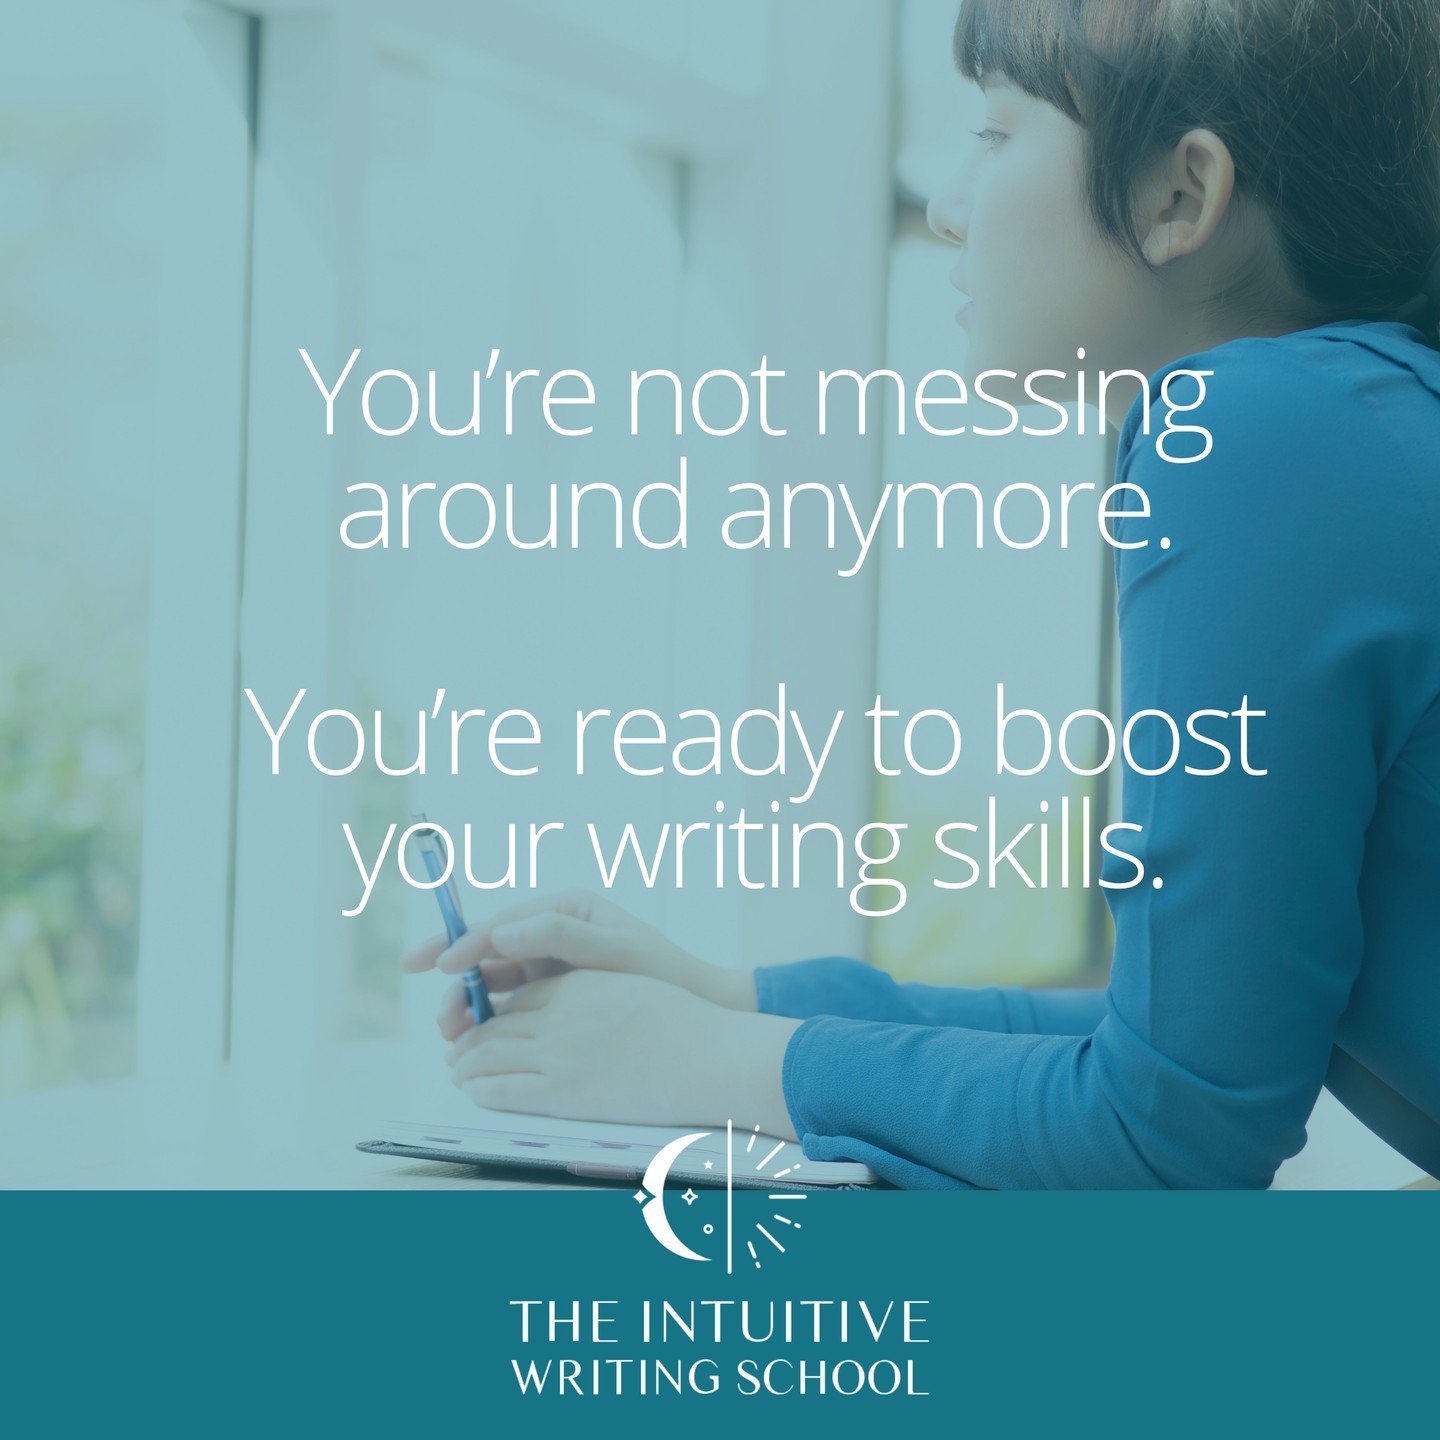 You're ready to nurture your writing skills.

🚀 Write better website copy
🚀&nbsp;Create consistent content for your blog, emails, and social
🚀&nbsp;Finish your big writing projects like books
🚀&nbsp;Stand out online while being fully authentic
🚀